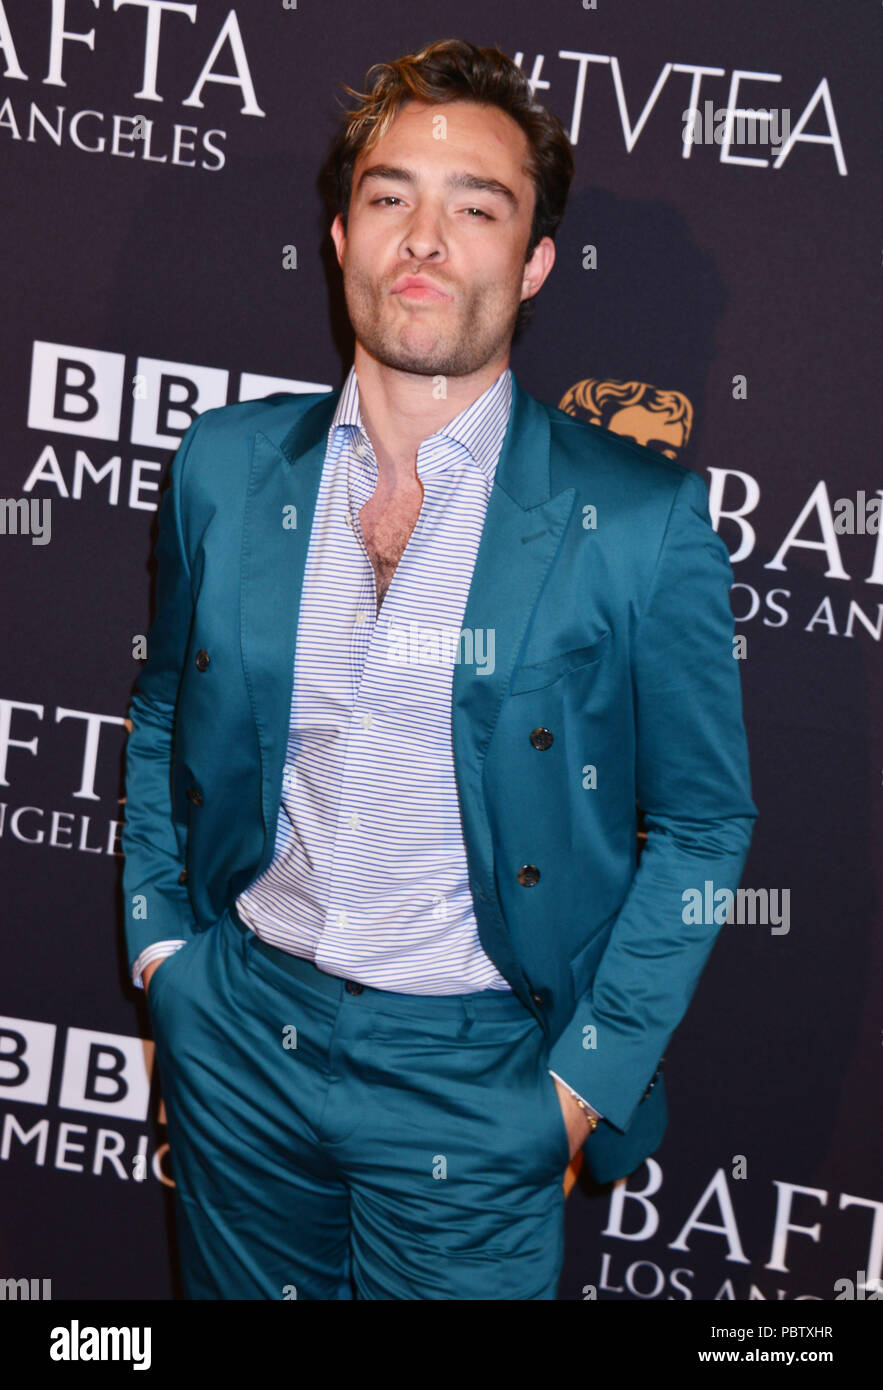 Ed Westwick 027 at The BAFTA Los Angeles TV Tea 2015 at the SLS Hotel in Los Angeles. September, 19, 2015.Ed Westwick 027 ------------- Red Carpet Event, Vertical, USA, Film Industry, Celebrities,  Photography, Bestof, Arts Culture and Entertainment, Topix Celebrities fashion /  Vertical, Best of, Event in Hollywood Life - California,  Red Carpet and backstage, USA, Film Industry, Celebrities,  movie celebrities, TV celebrities, Music celebrities, Photography, Bestof, Arts Culture and Entertainment,  Topix, Three Quarters, vertical, one person,, from the year , 2015, inquiry tsuni@Gamma-USA.co Stock Photo